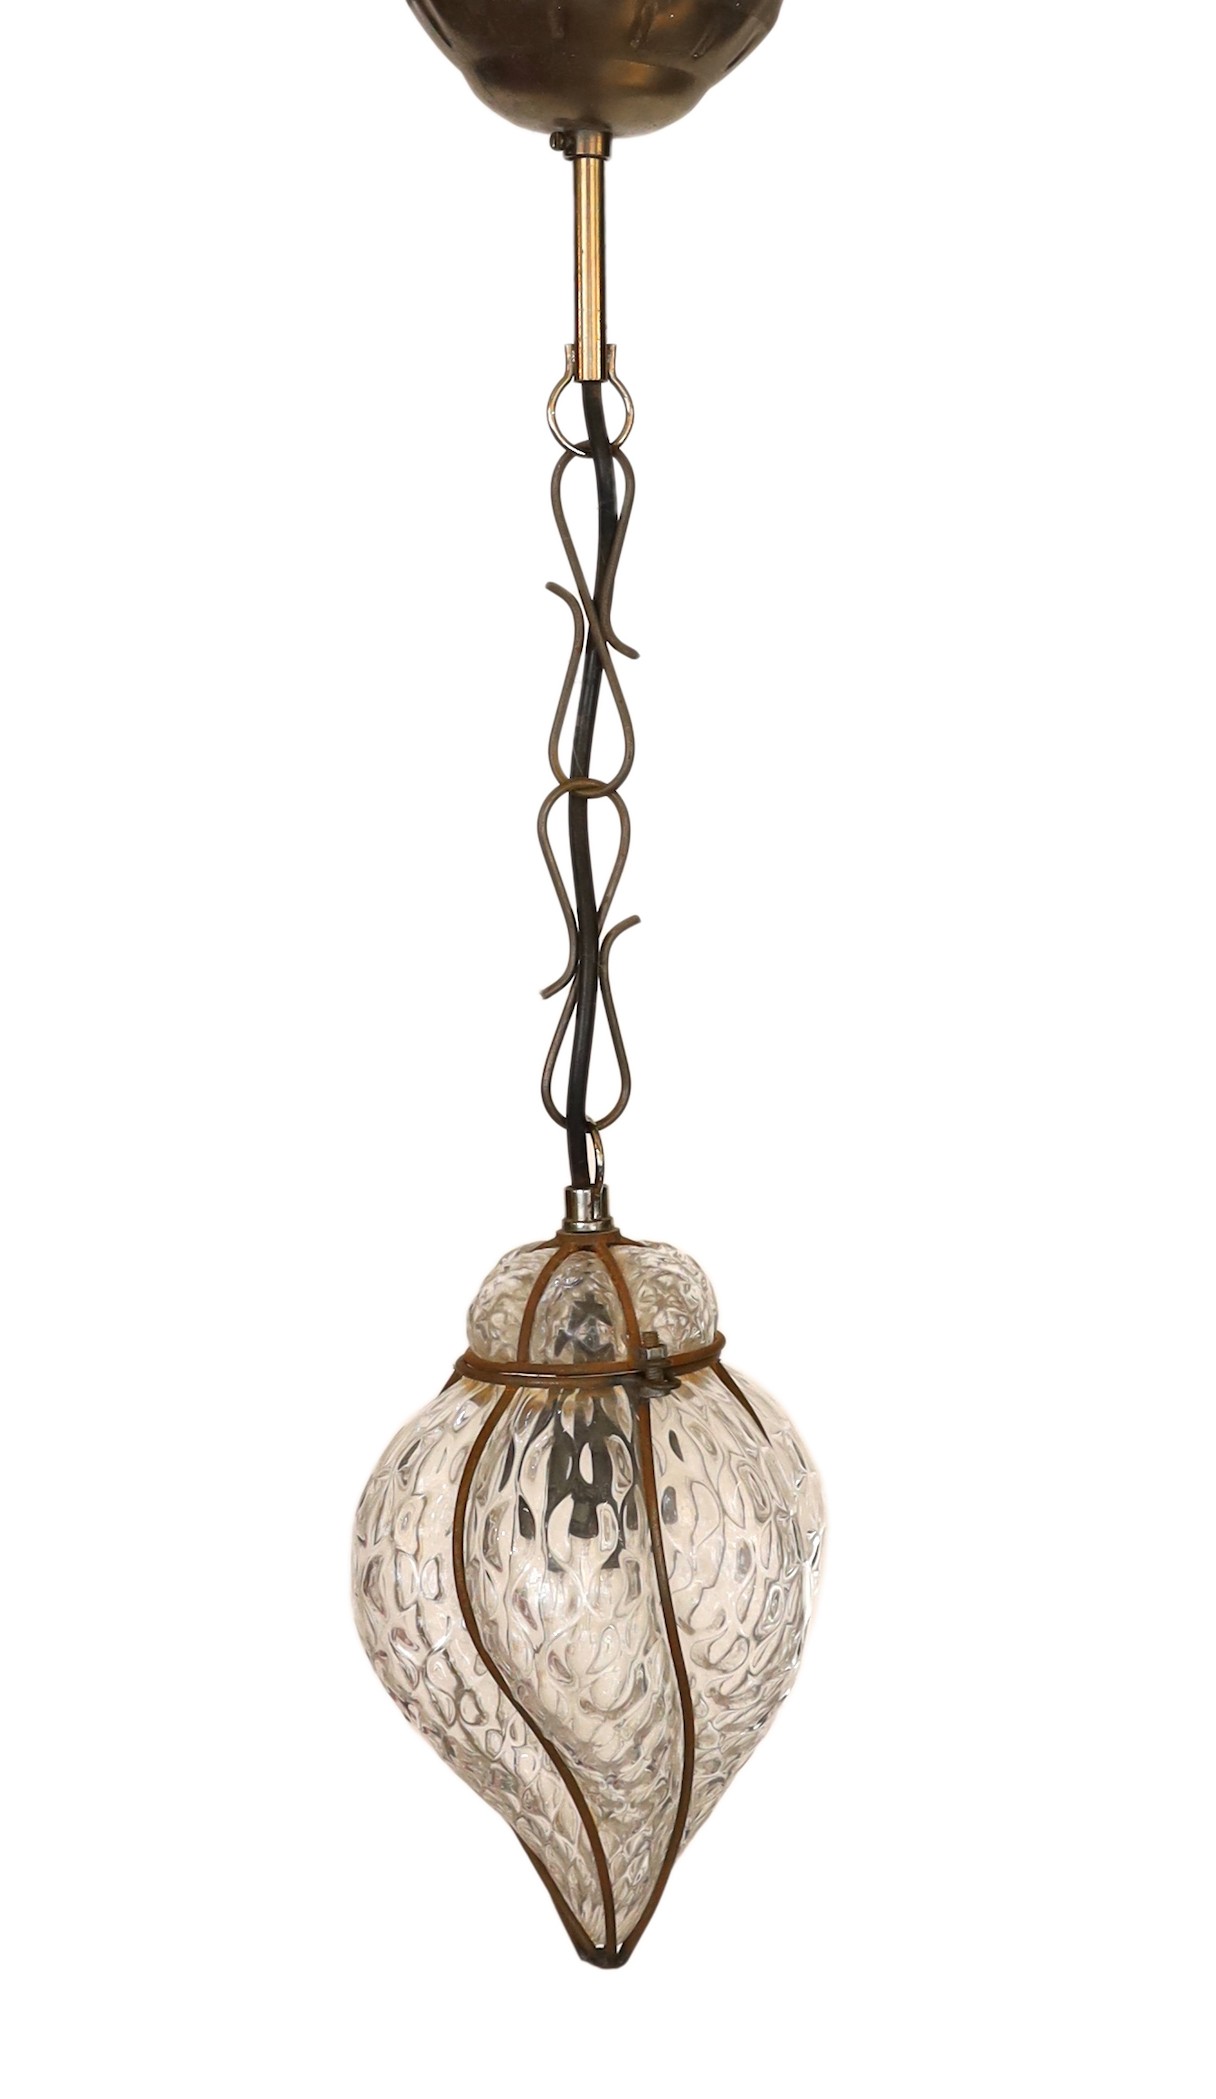 An Italian blown glass and metal light pendant, height including chains 54cm